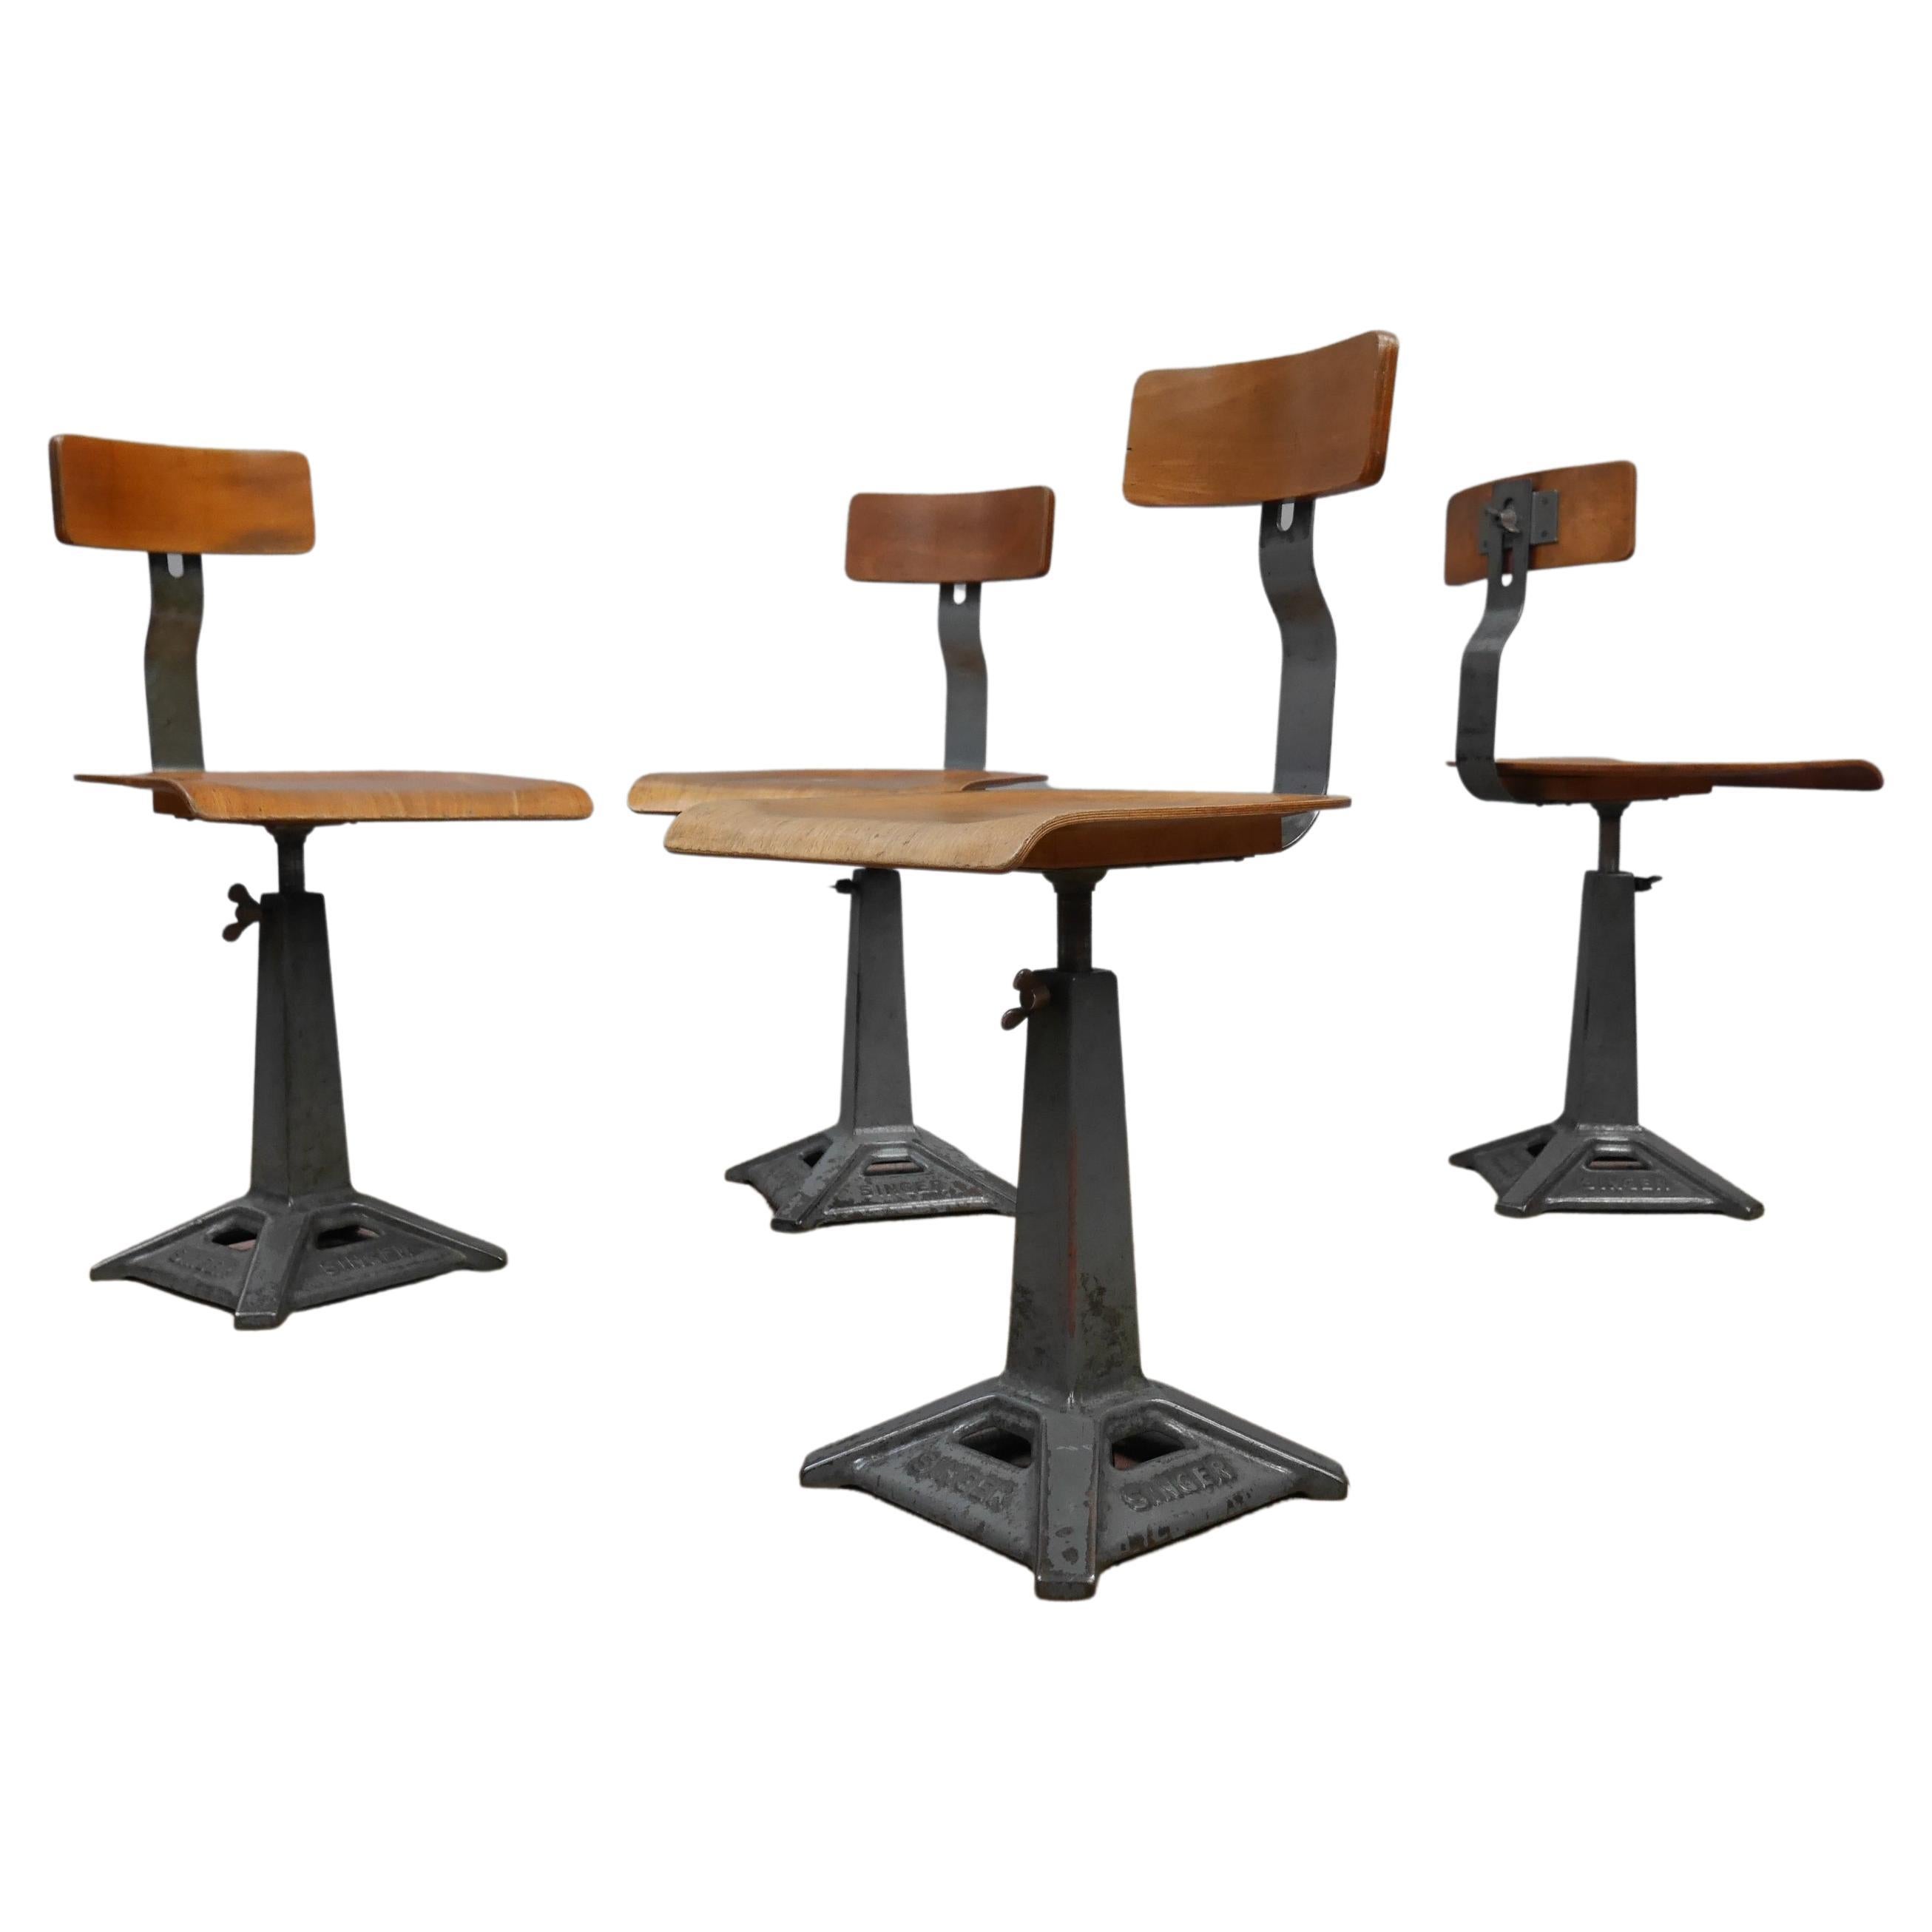 Set of Four Singer Machinist Chairs, c1950